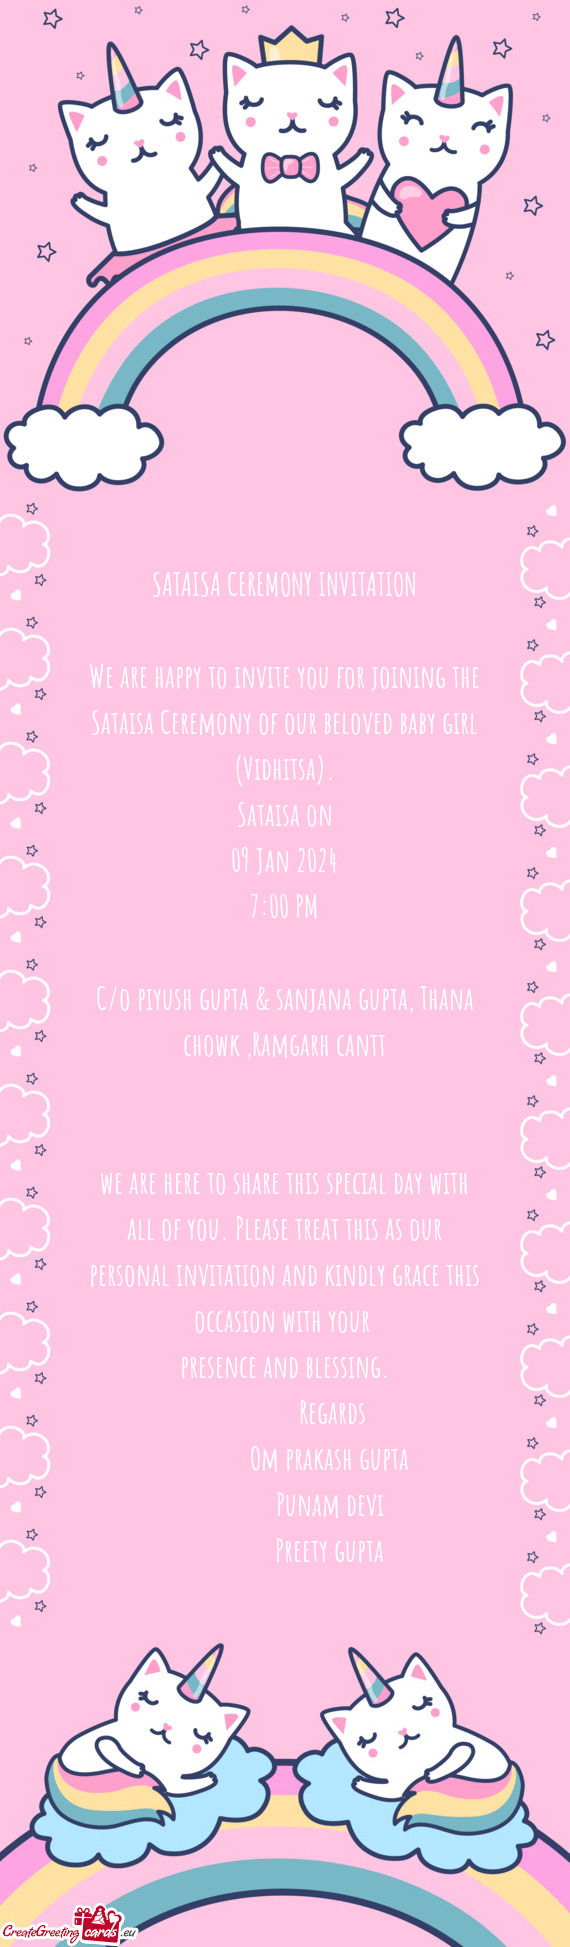 We are happy to invite you for joining the Sataisa Ceremony of our beloved baby girl (Vidhitsa)